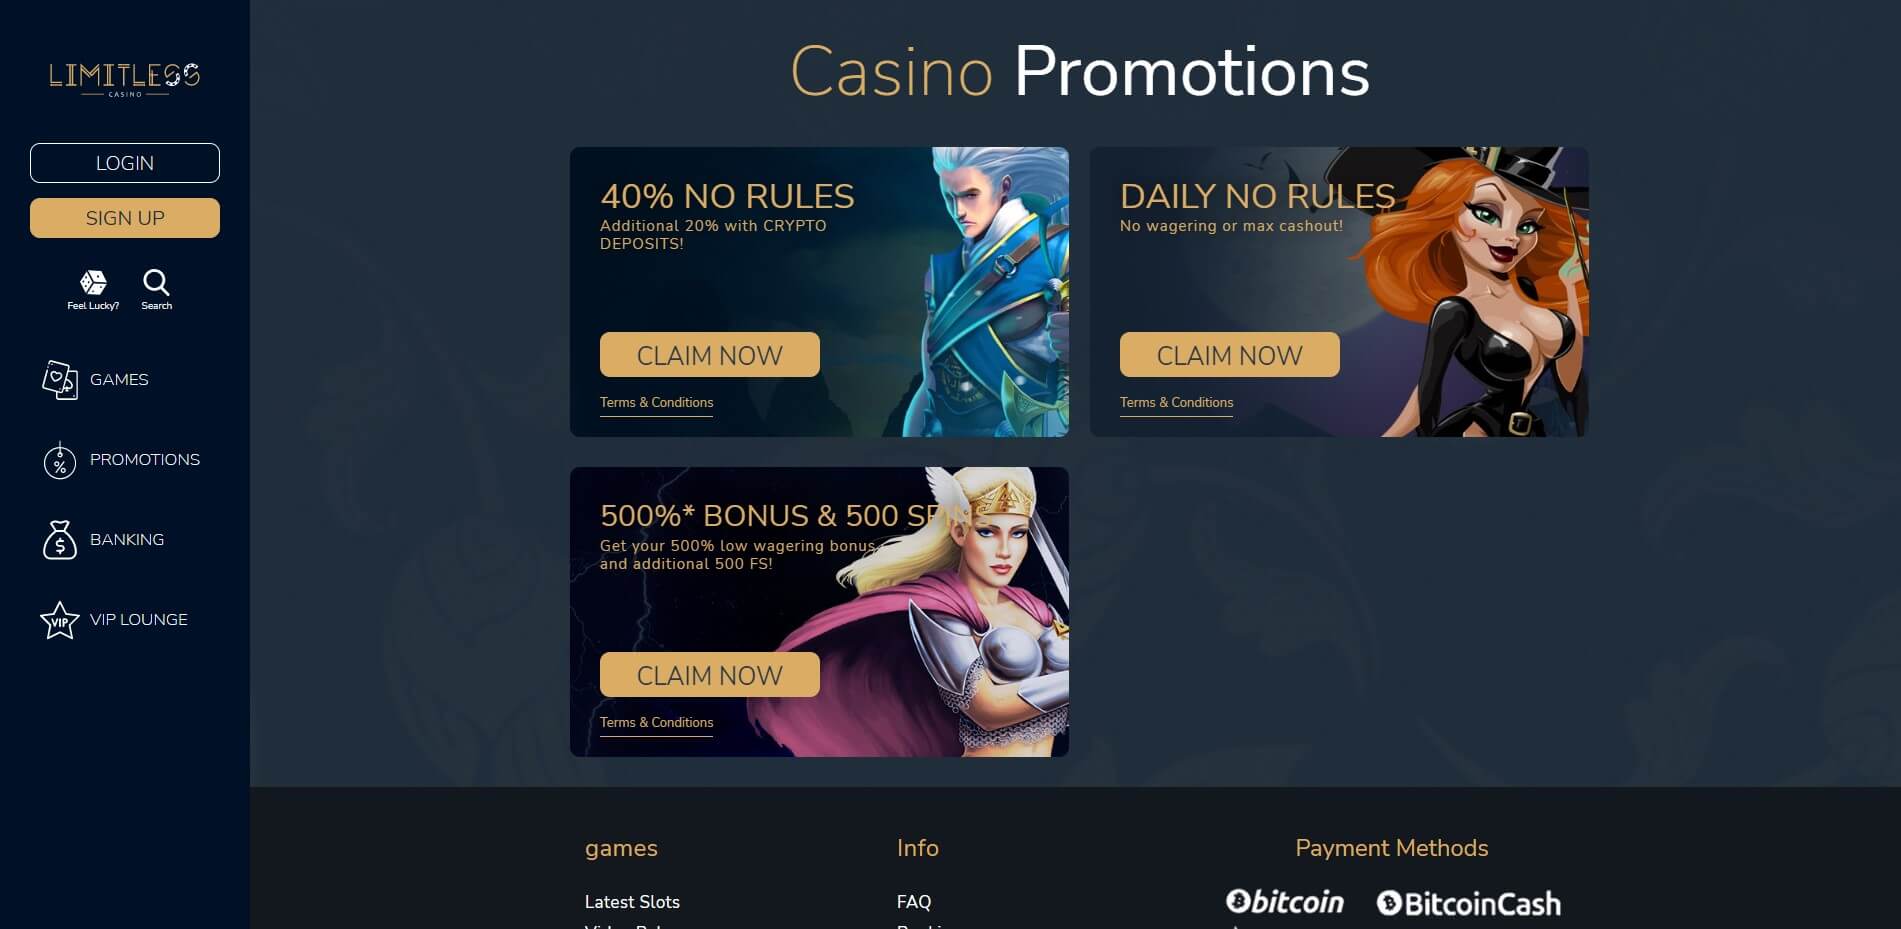 Limitless Casino Games Review